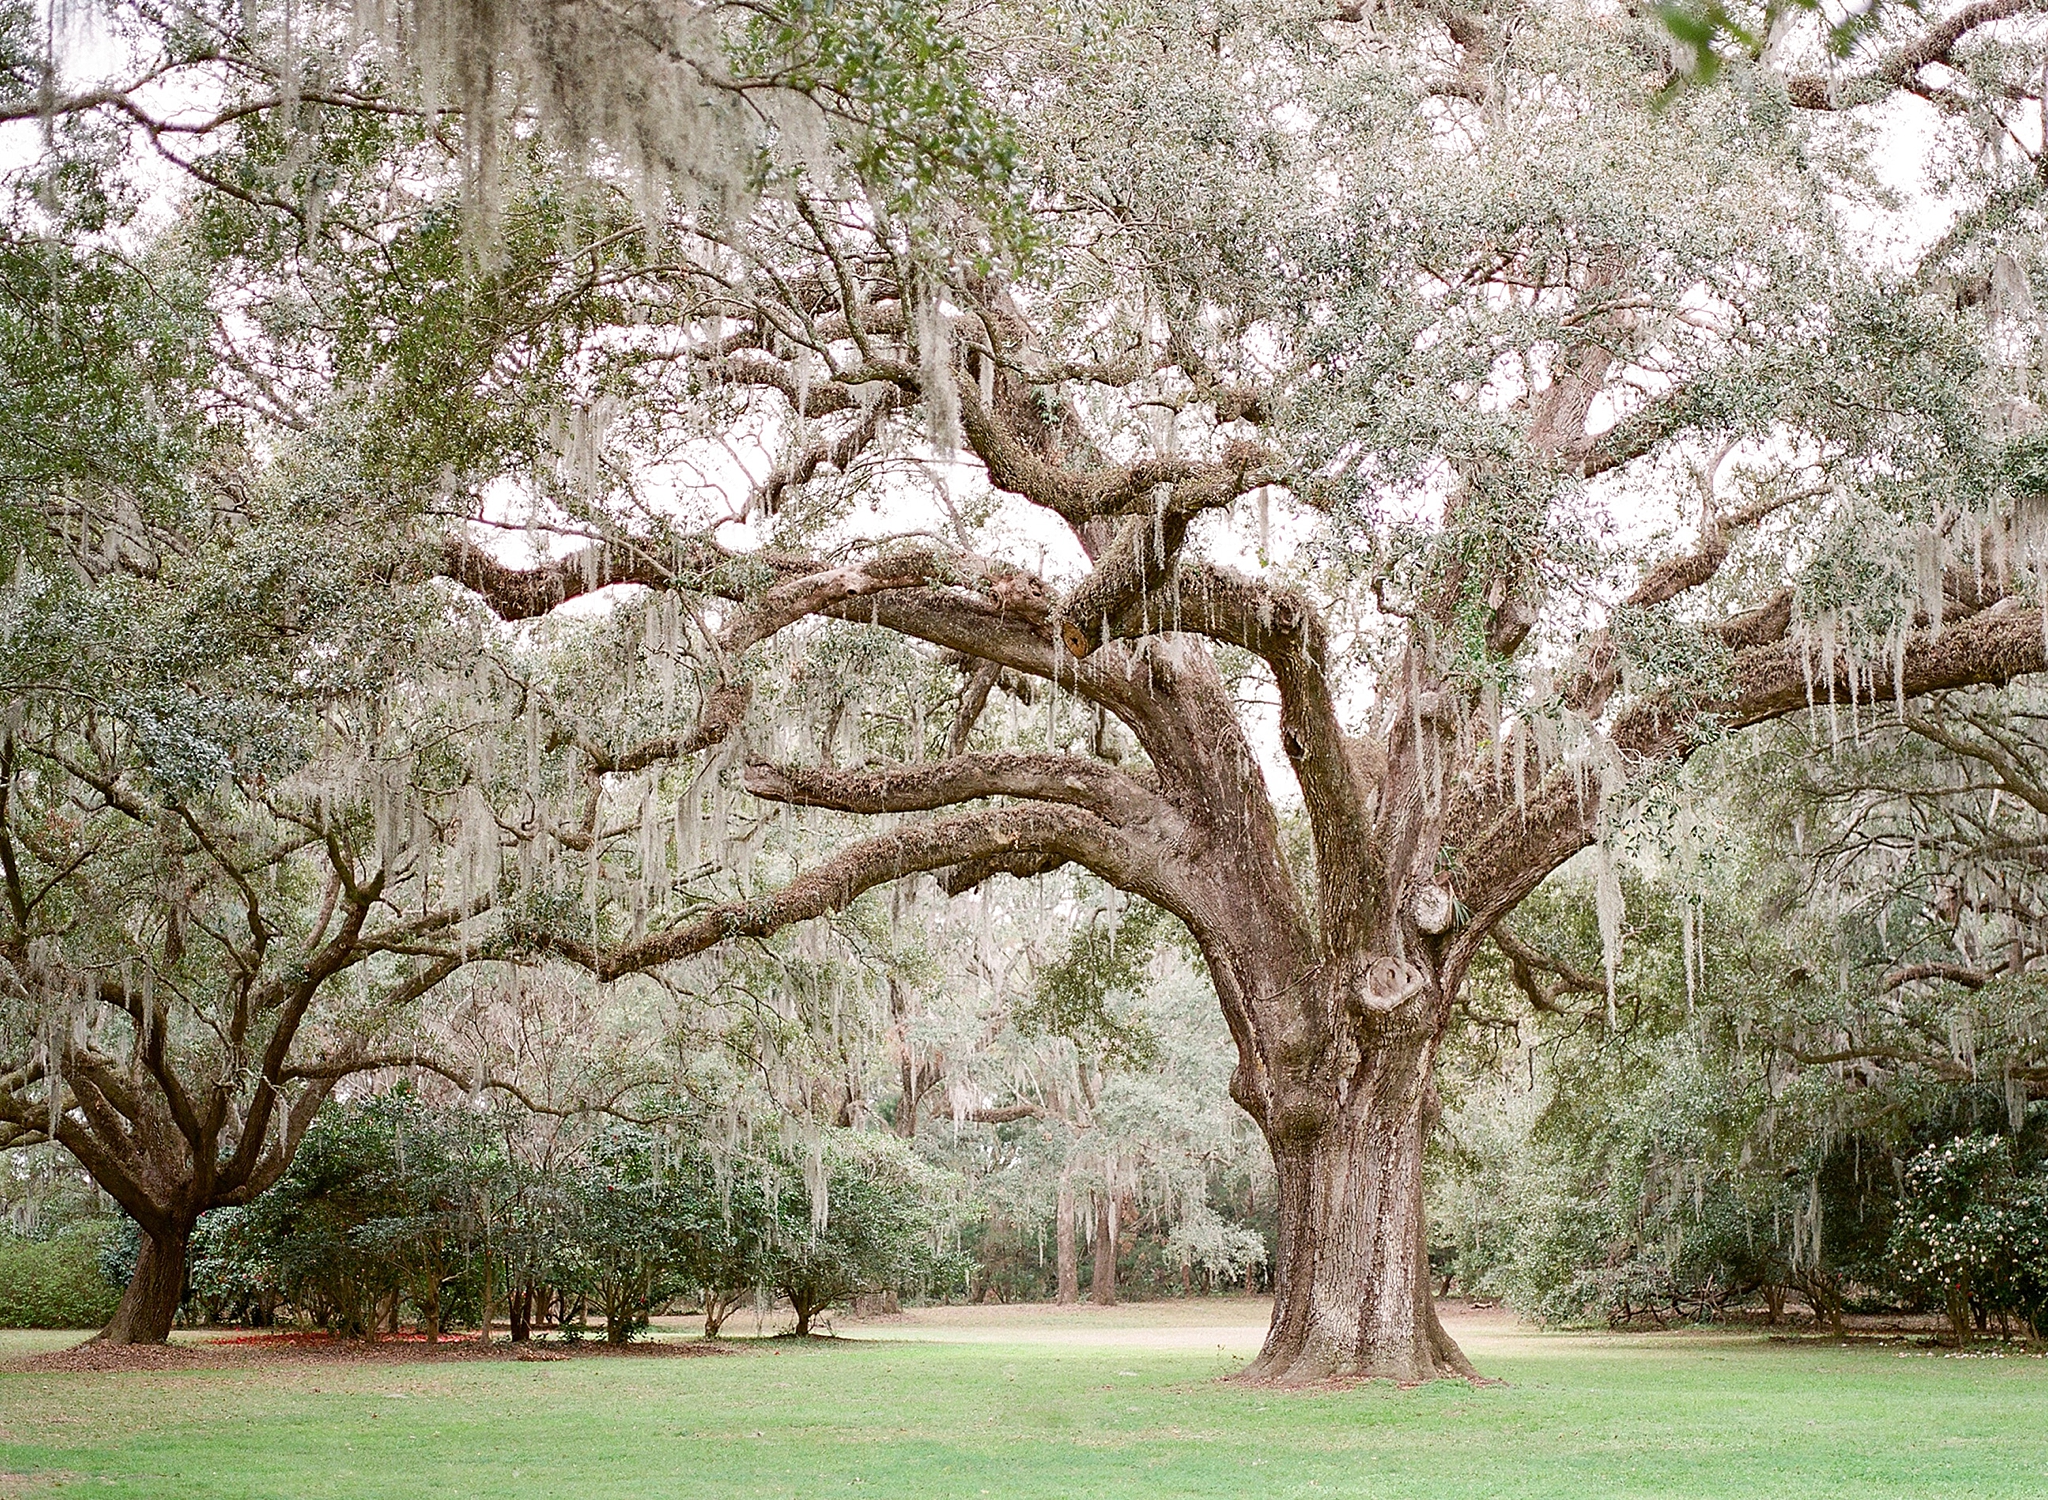 Alicia Lacey, a wedding and anniversary photographer, travels to Charleston, SC to capture this gorgeous city on film.